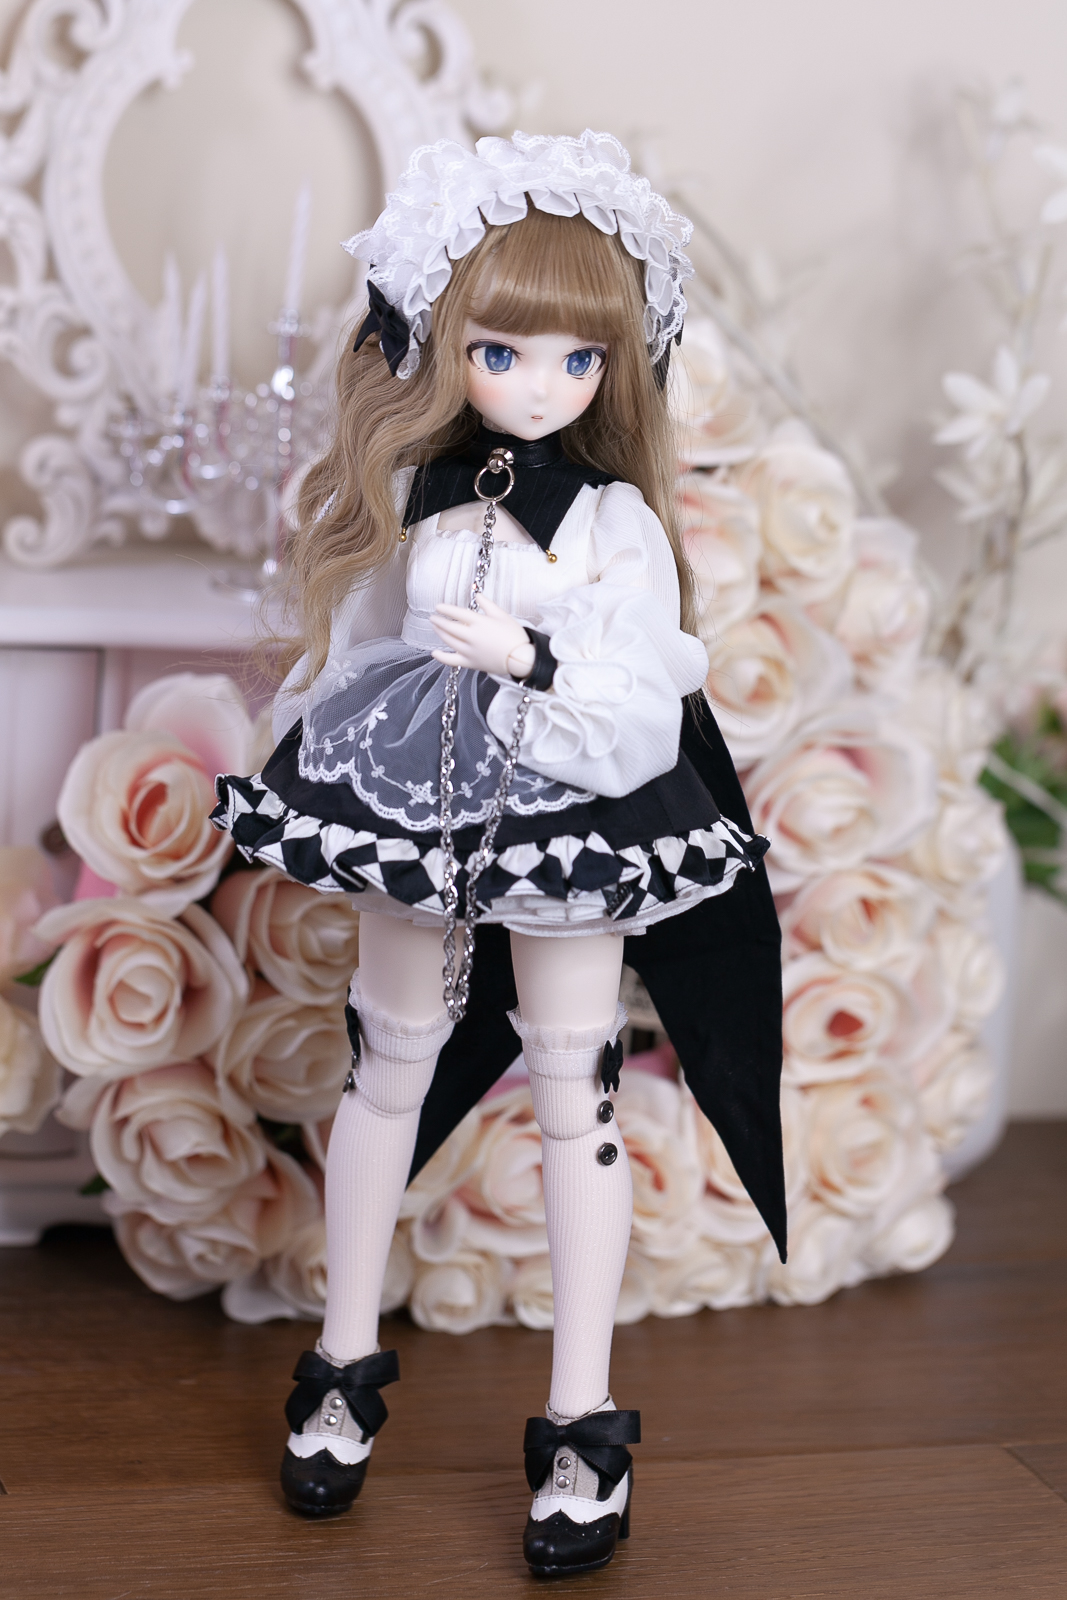 Bjd Unboxing: Doll Family H Body and Shoes?